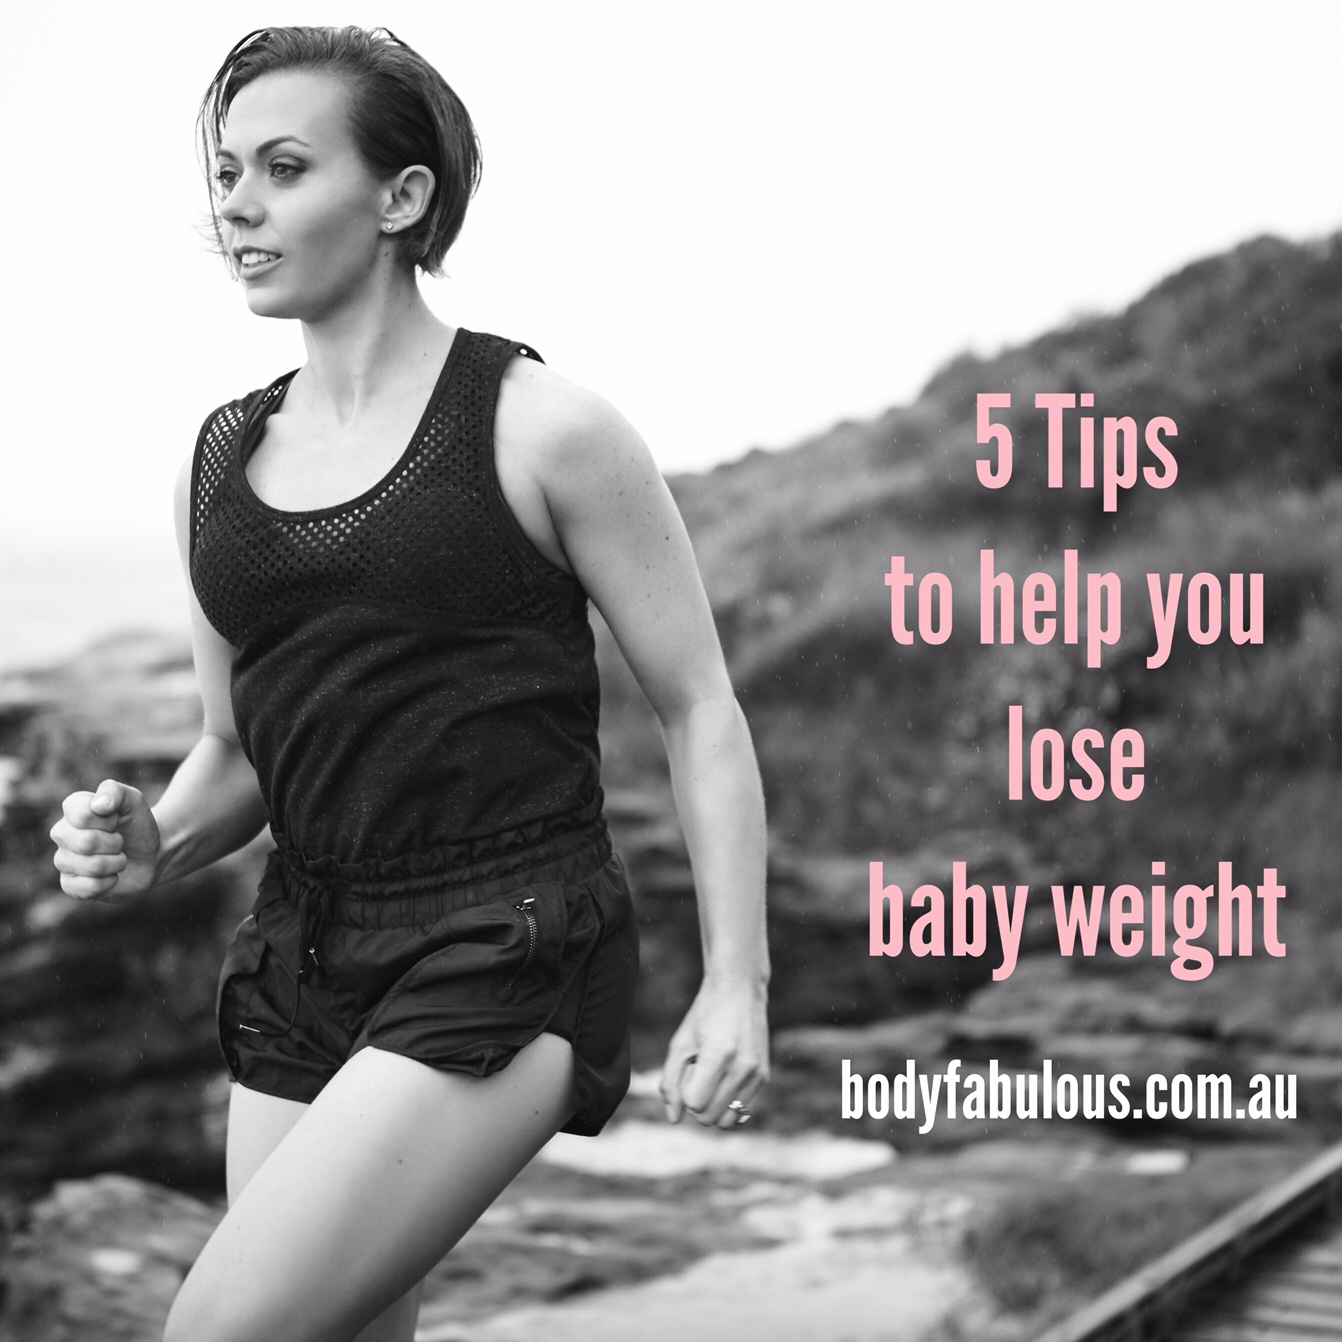 EFFECTIVELY lose BABY WEIGHT